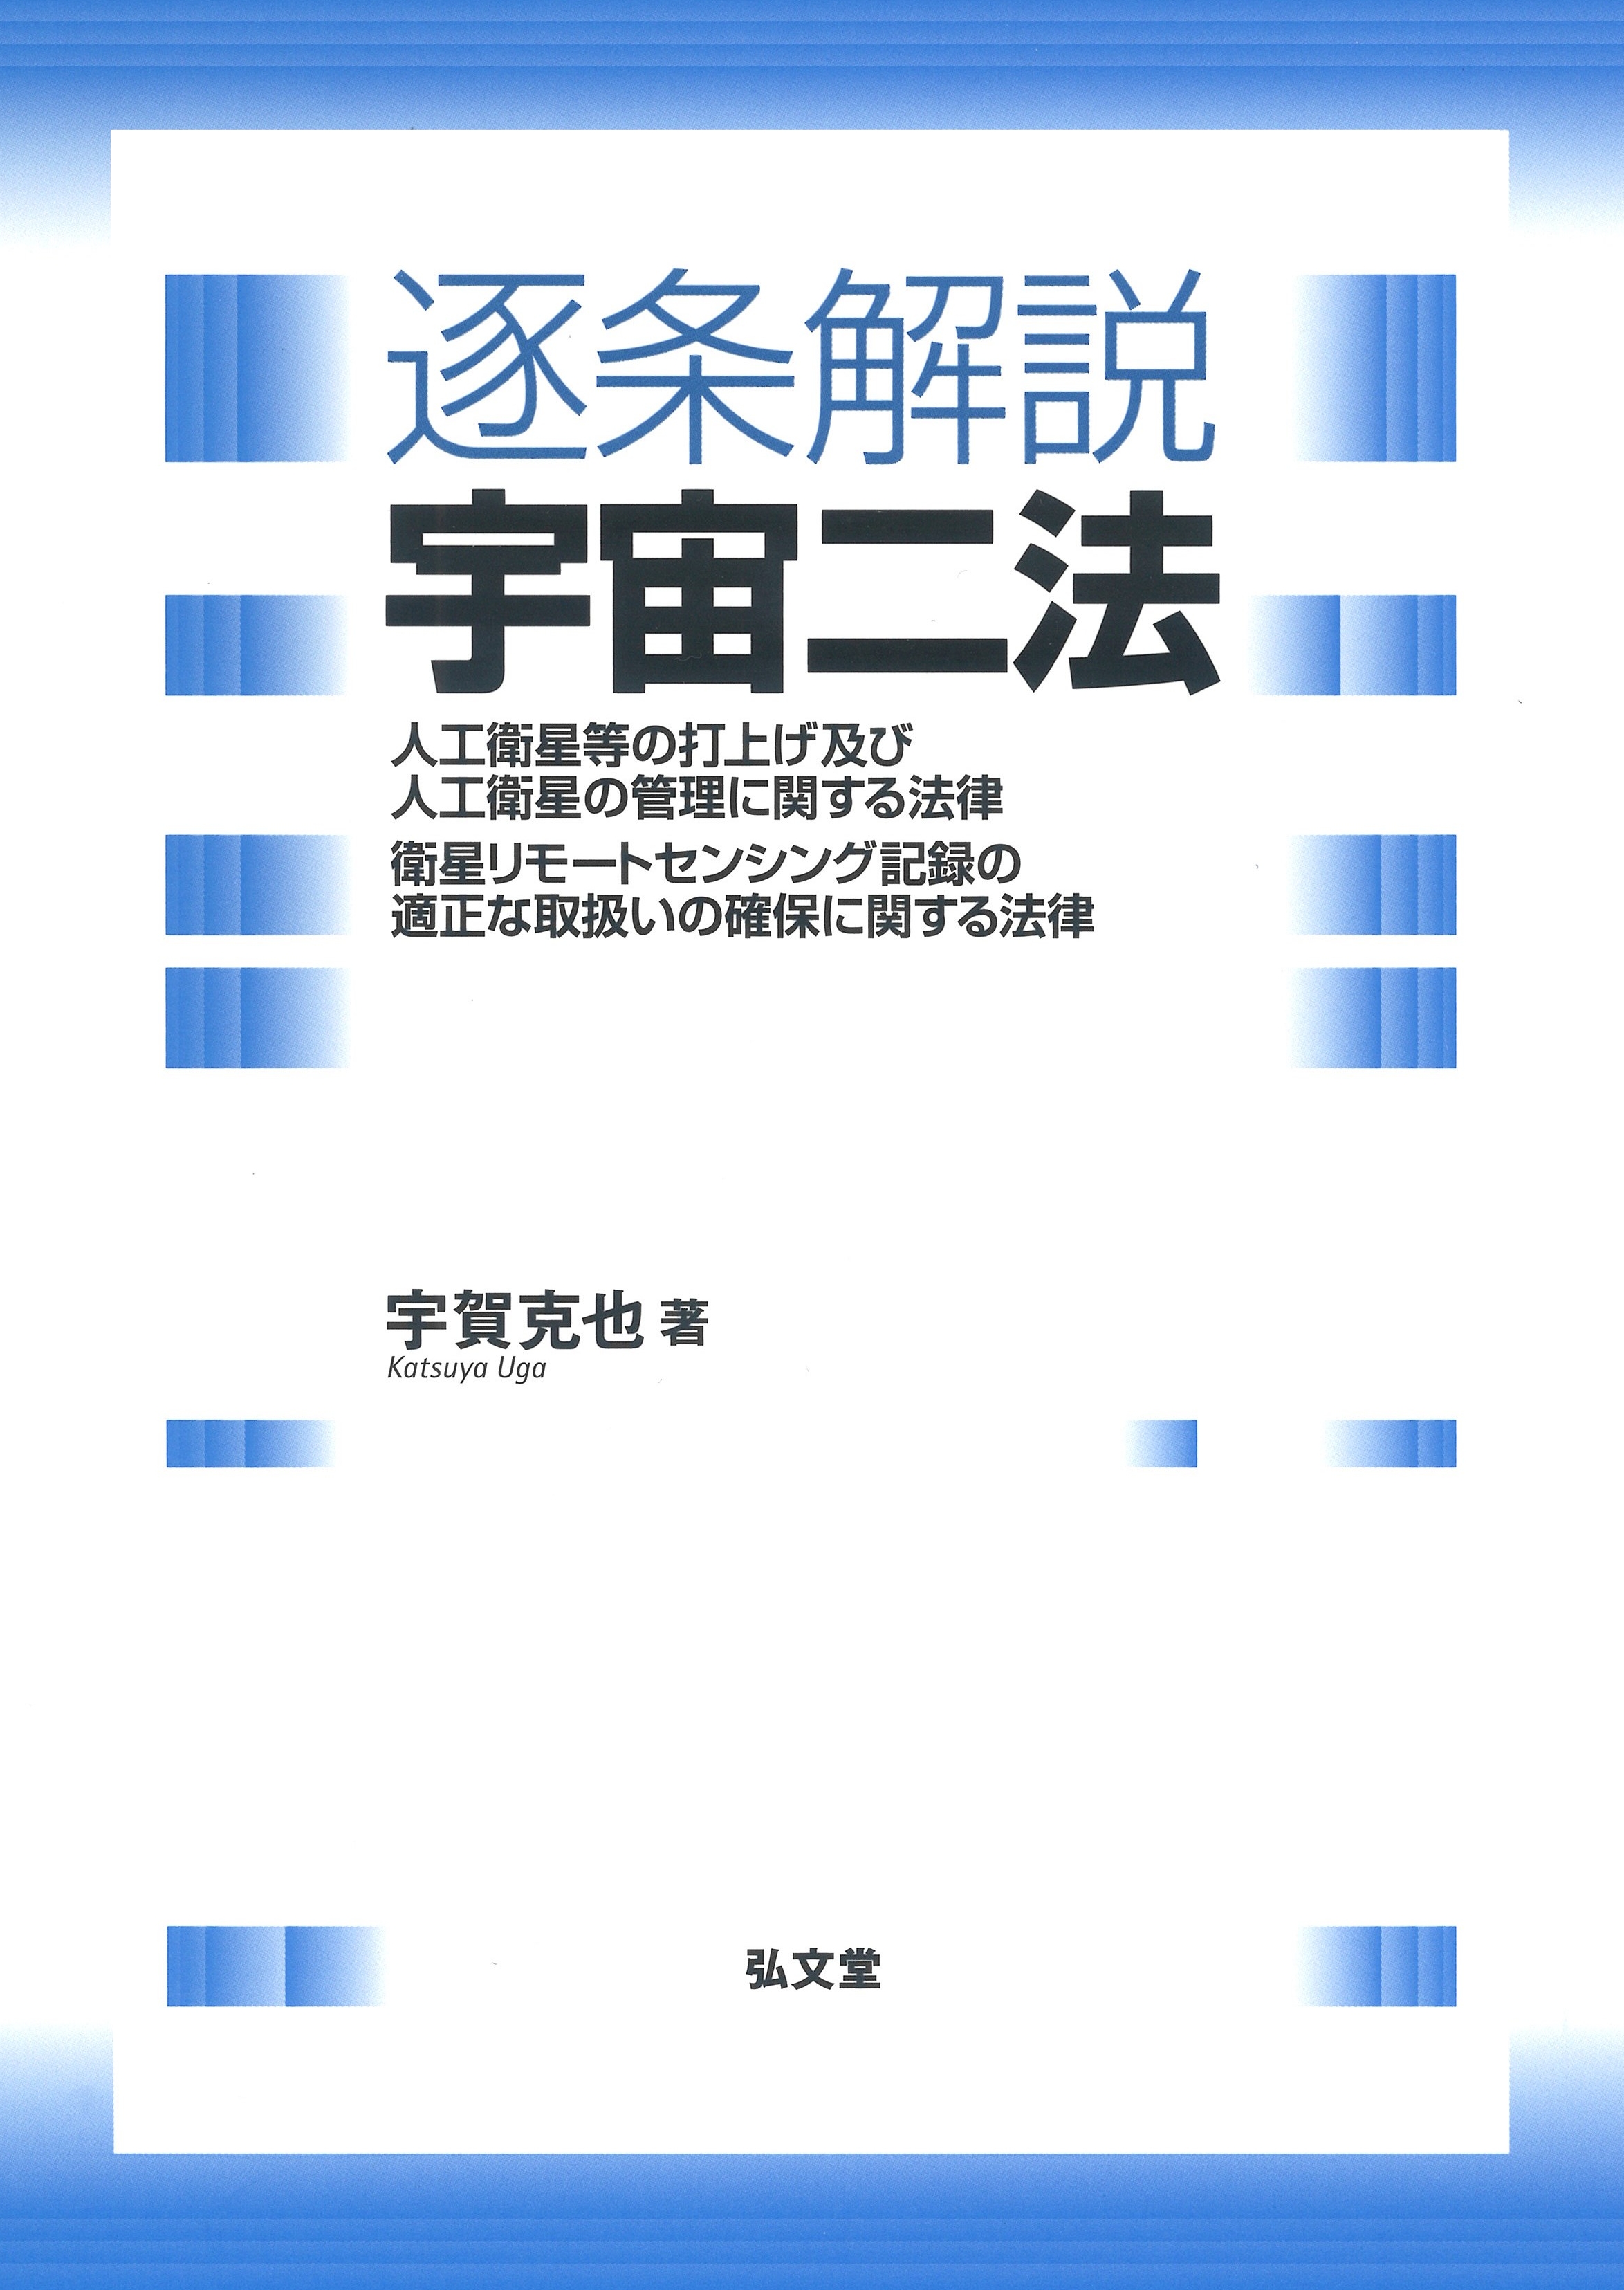 A white and blue cover